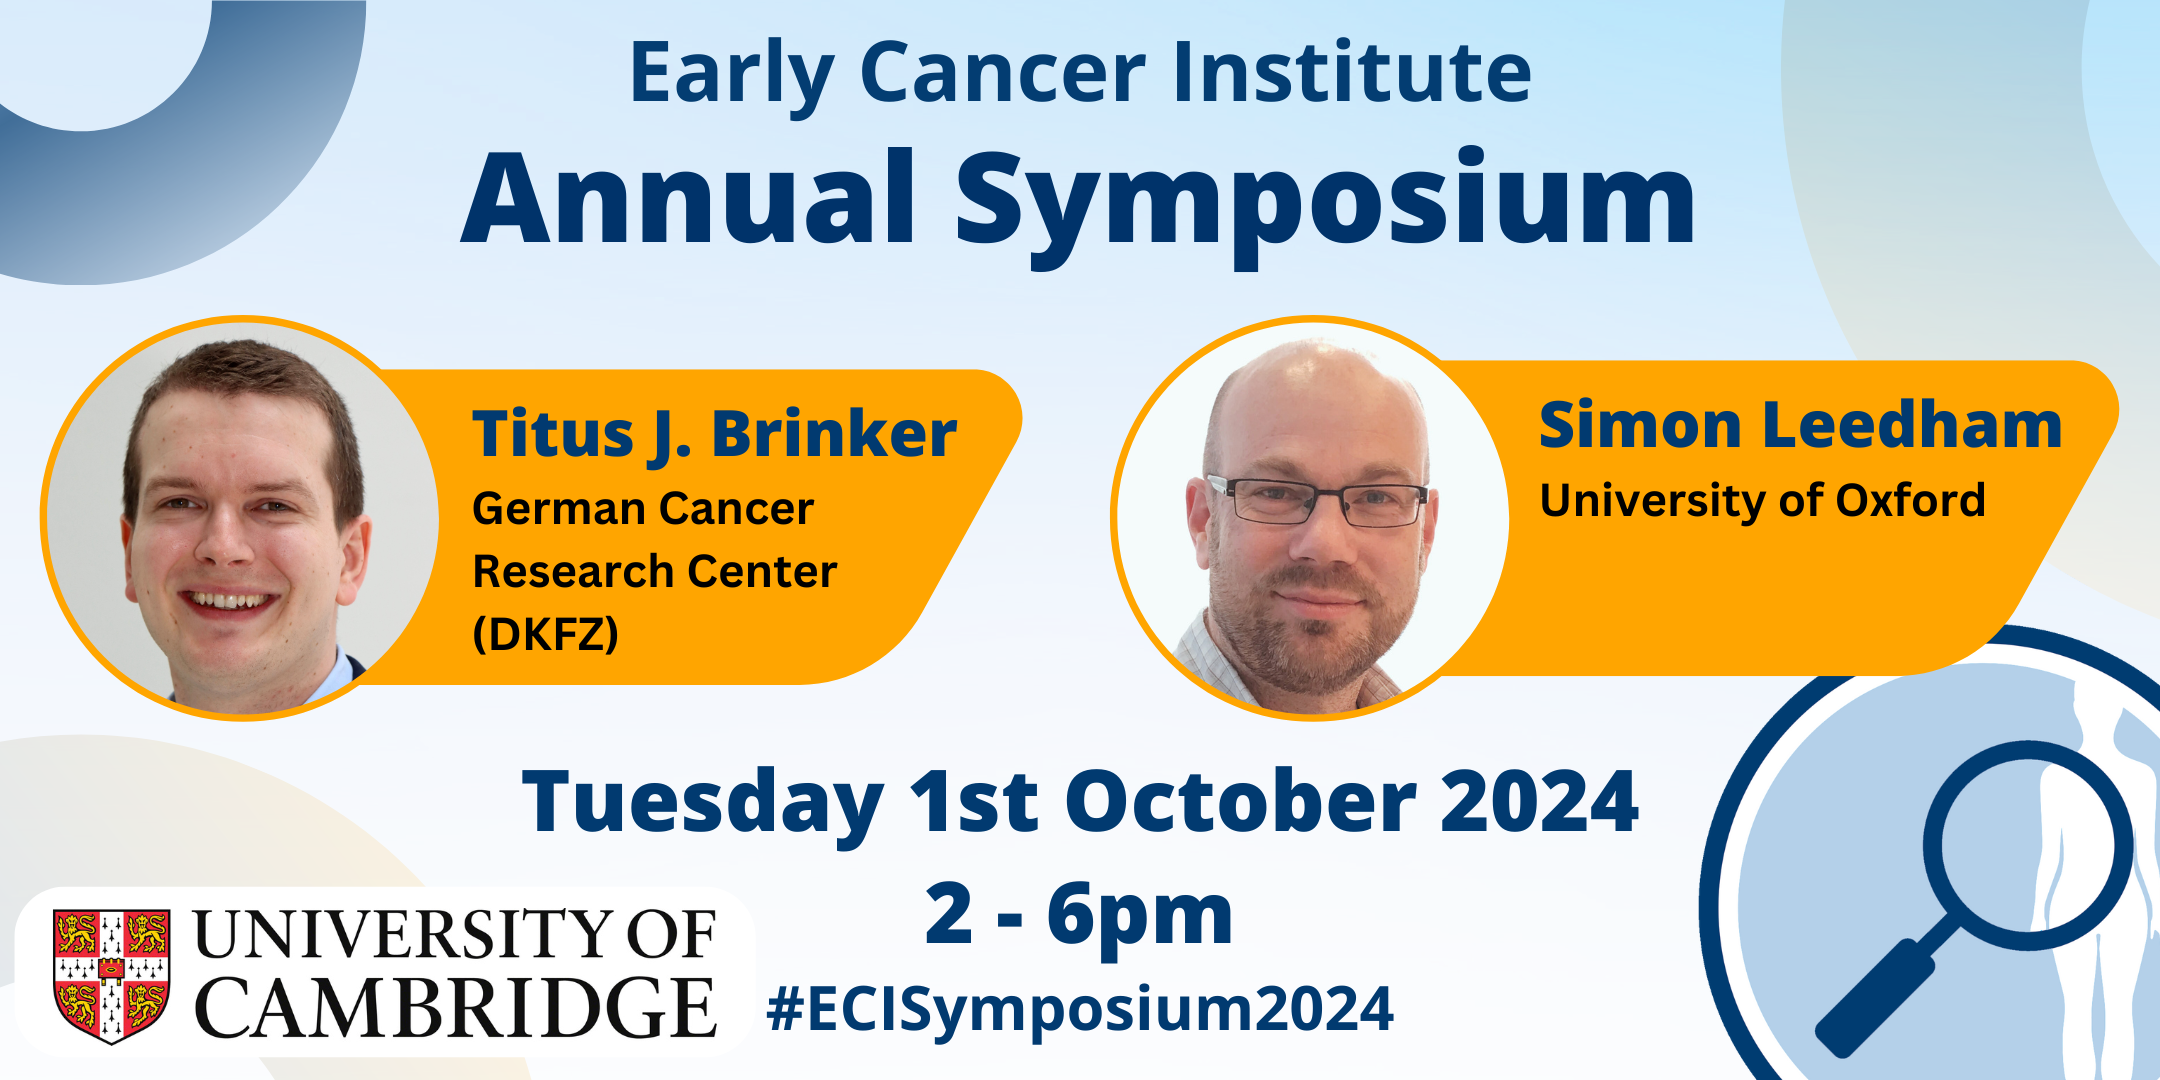 Early Cancer Institute Annual Symposium